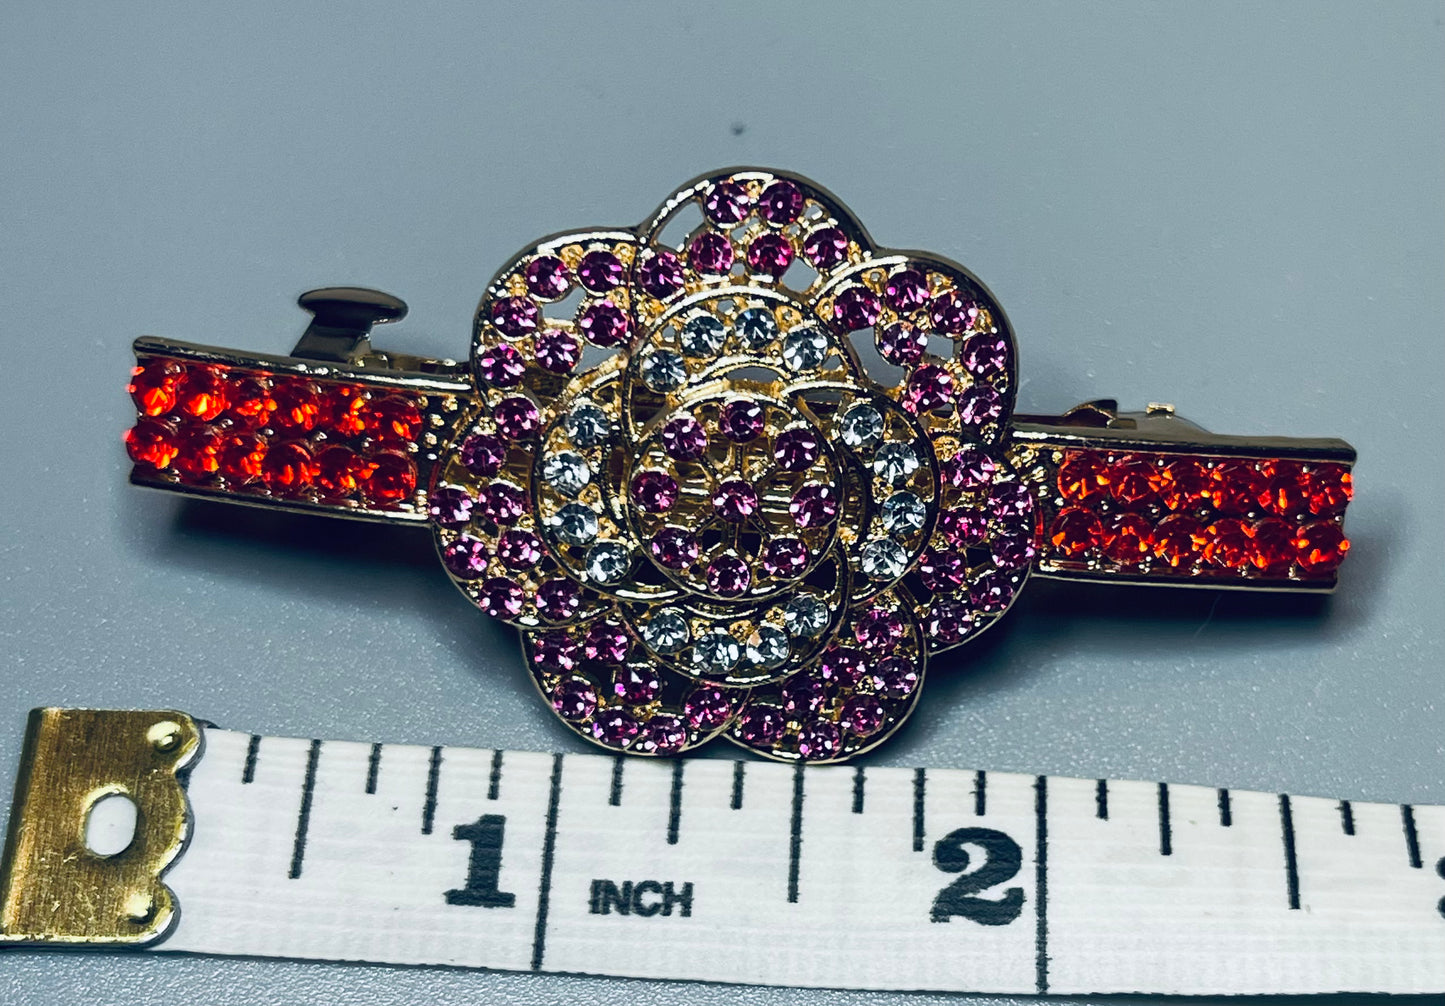 Red pink flower Crystal rhinestone barrette approximately 3.0” gold tone formal hair accessories gift wedding bridesmaid prom birthday mother of bride groom